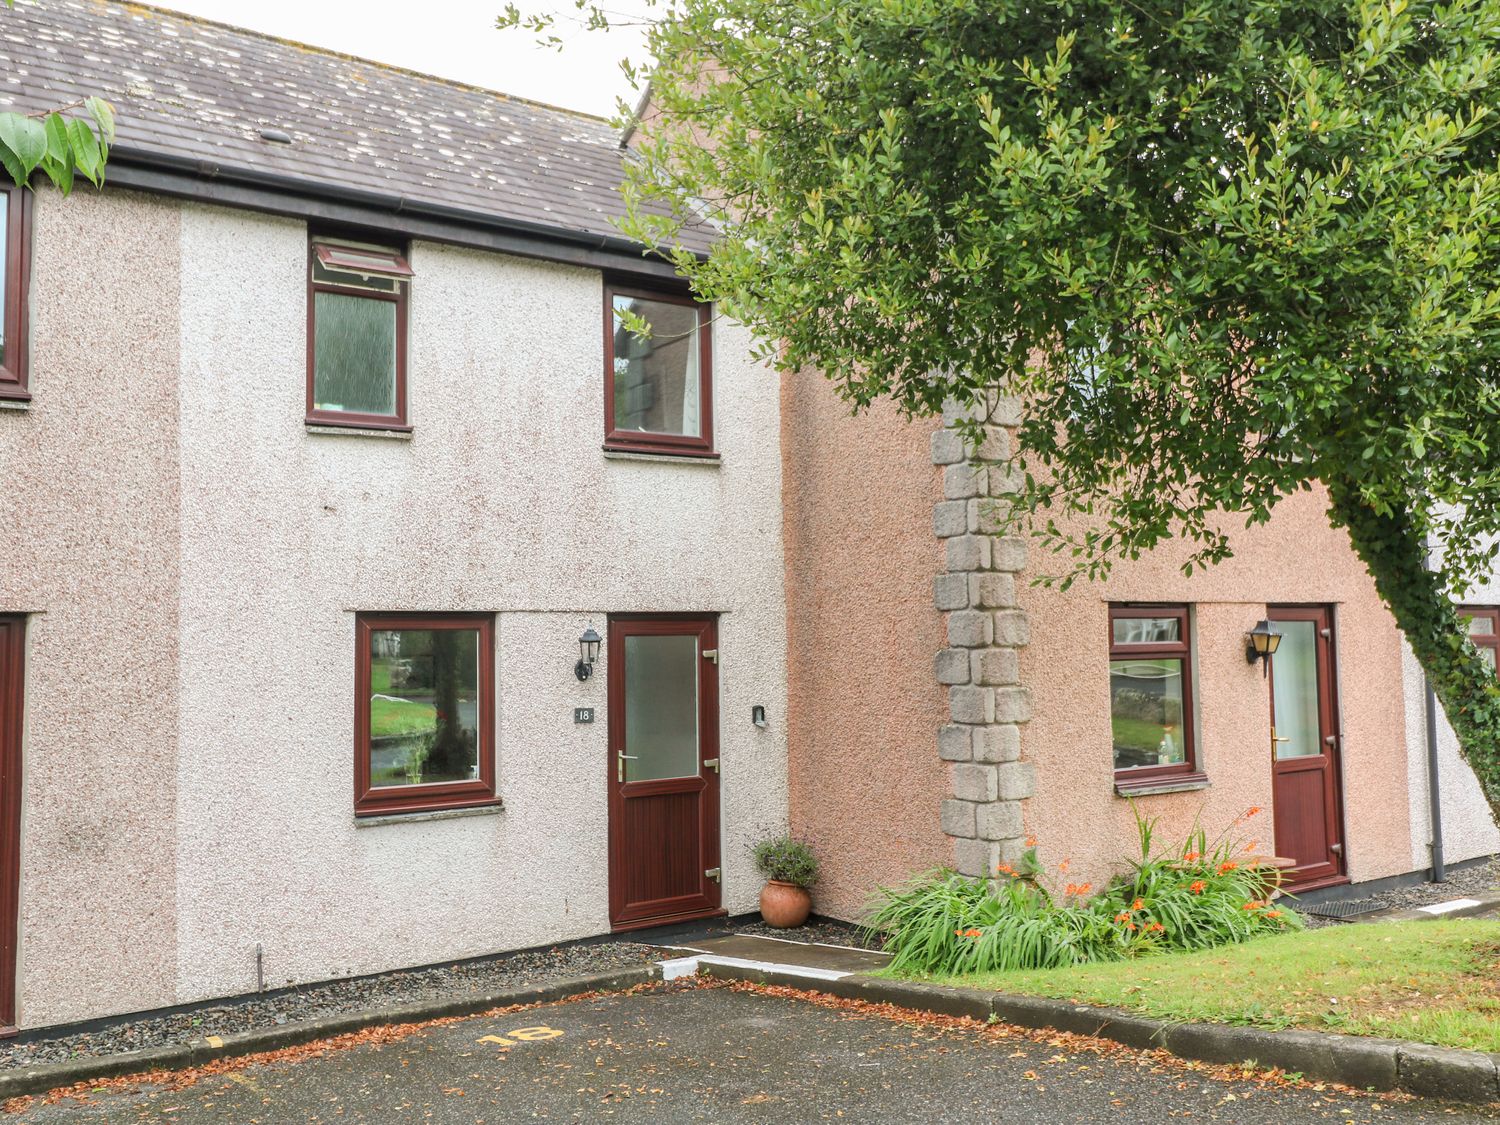 18 Old Court - Cornwall - 939306 - photo 1